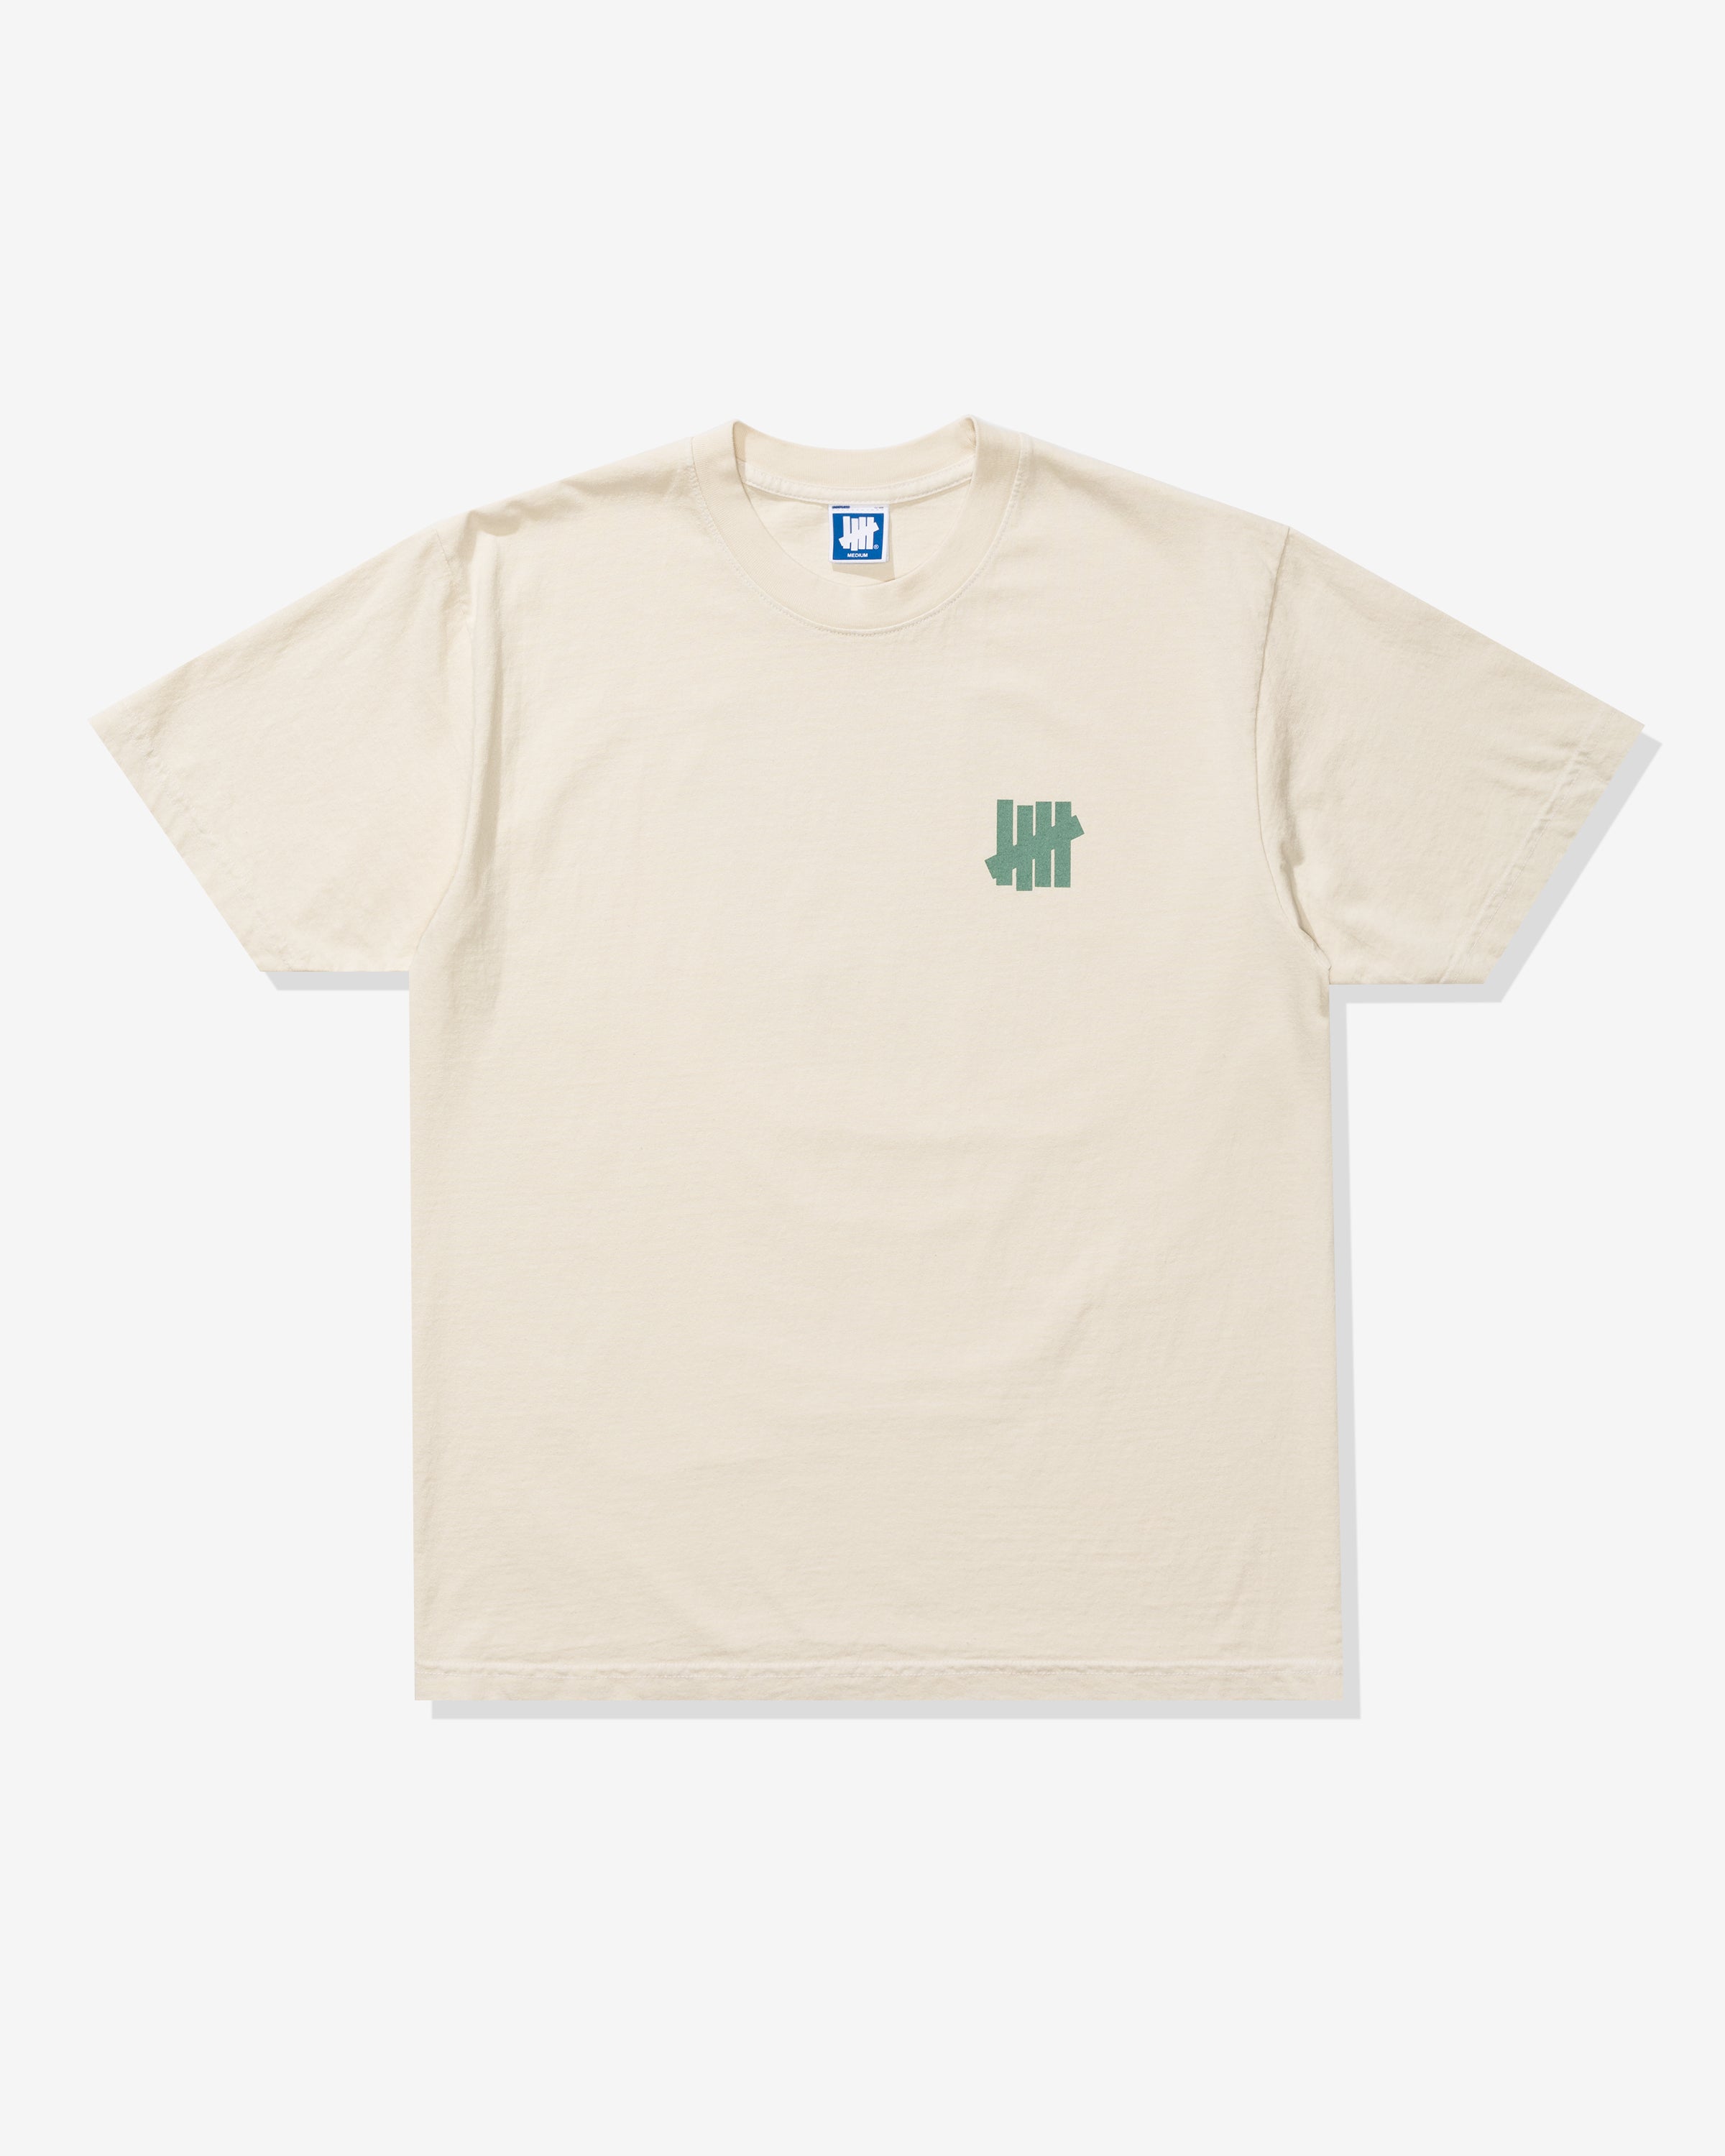 UNDEFEATED ICON S/S TEE – Undefeated